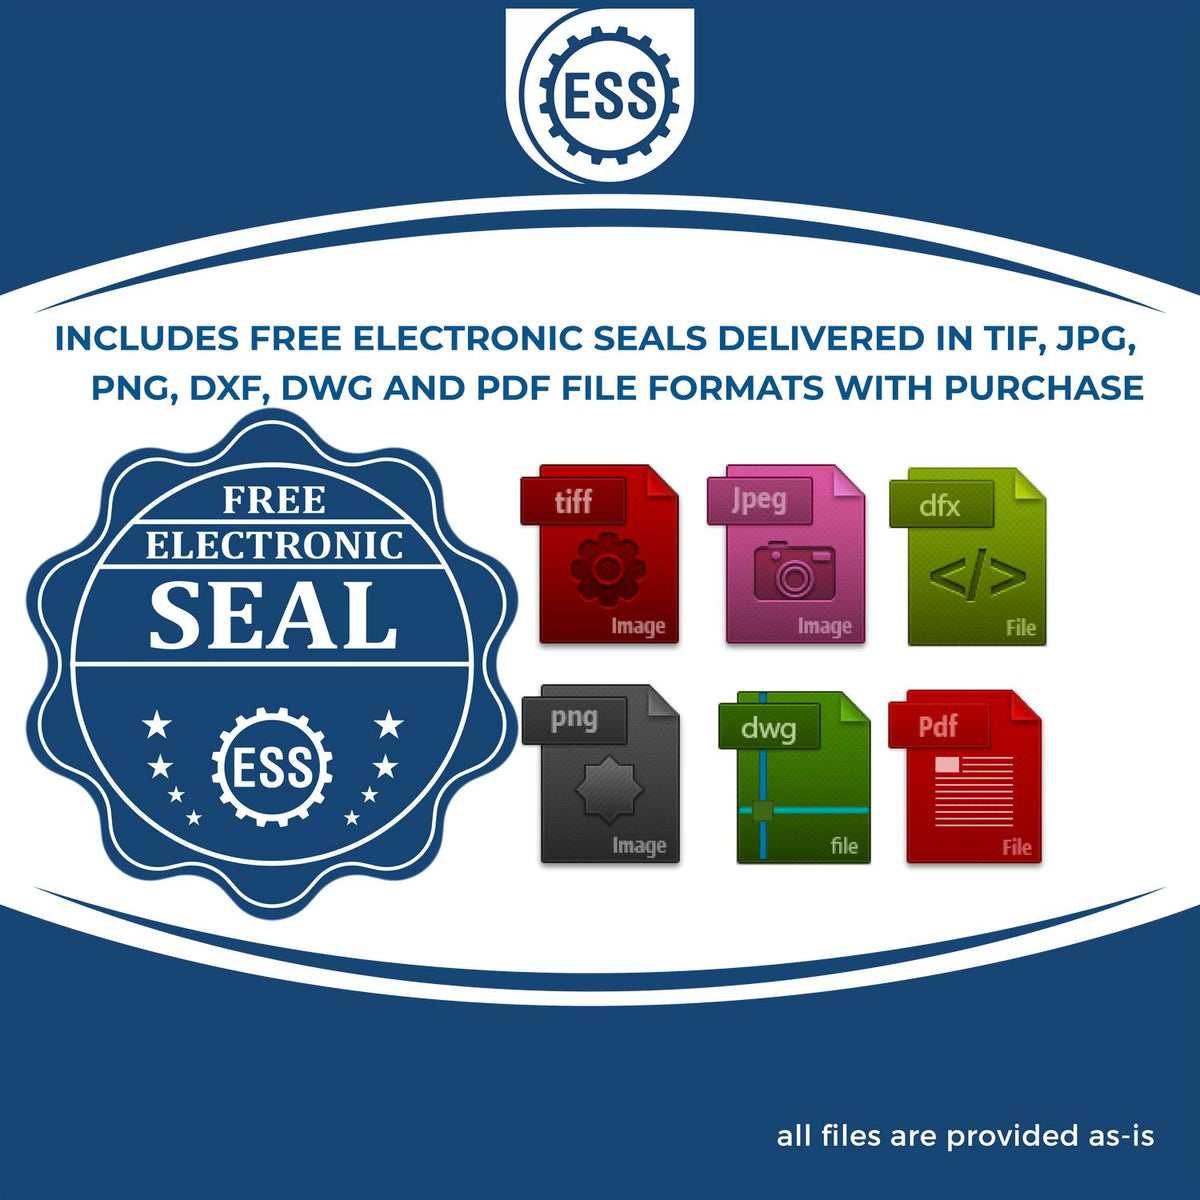 An infographic for the free electronic seal for the Long Reach New York PE Seal illustrating the different file type icons such as DXF, DWG, TIF, JPG and PNG.